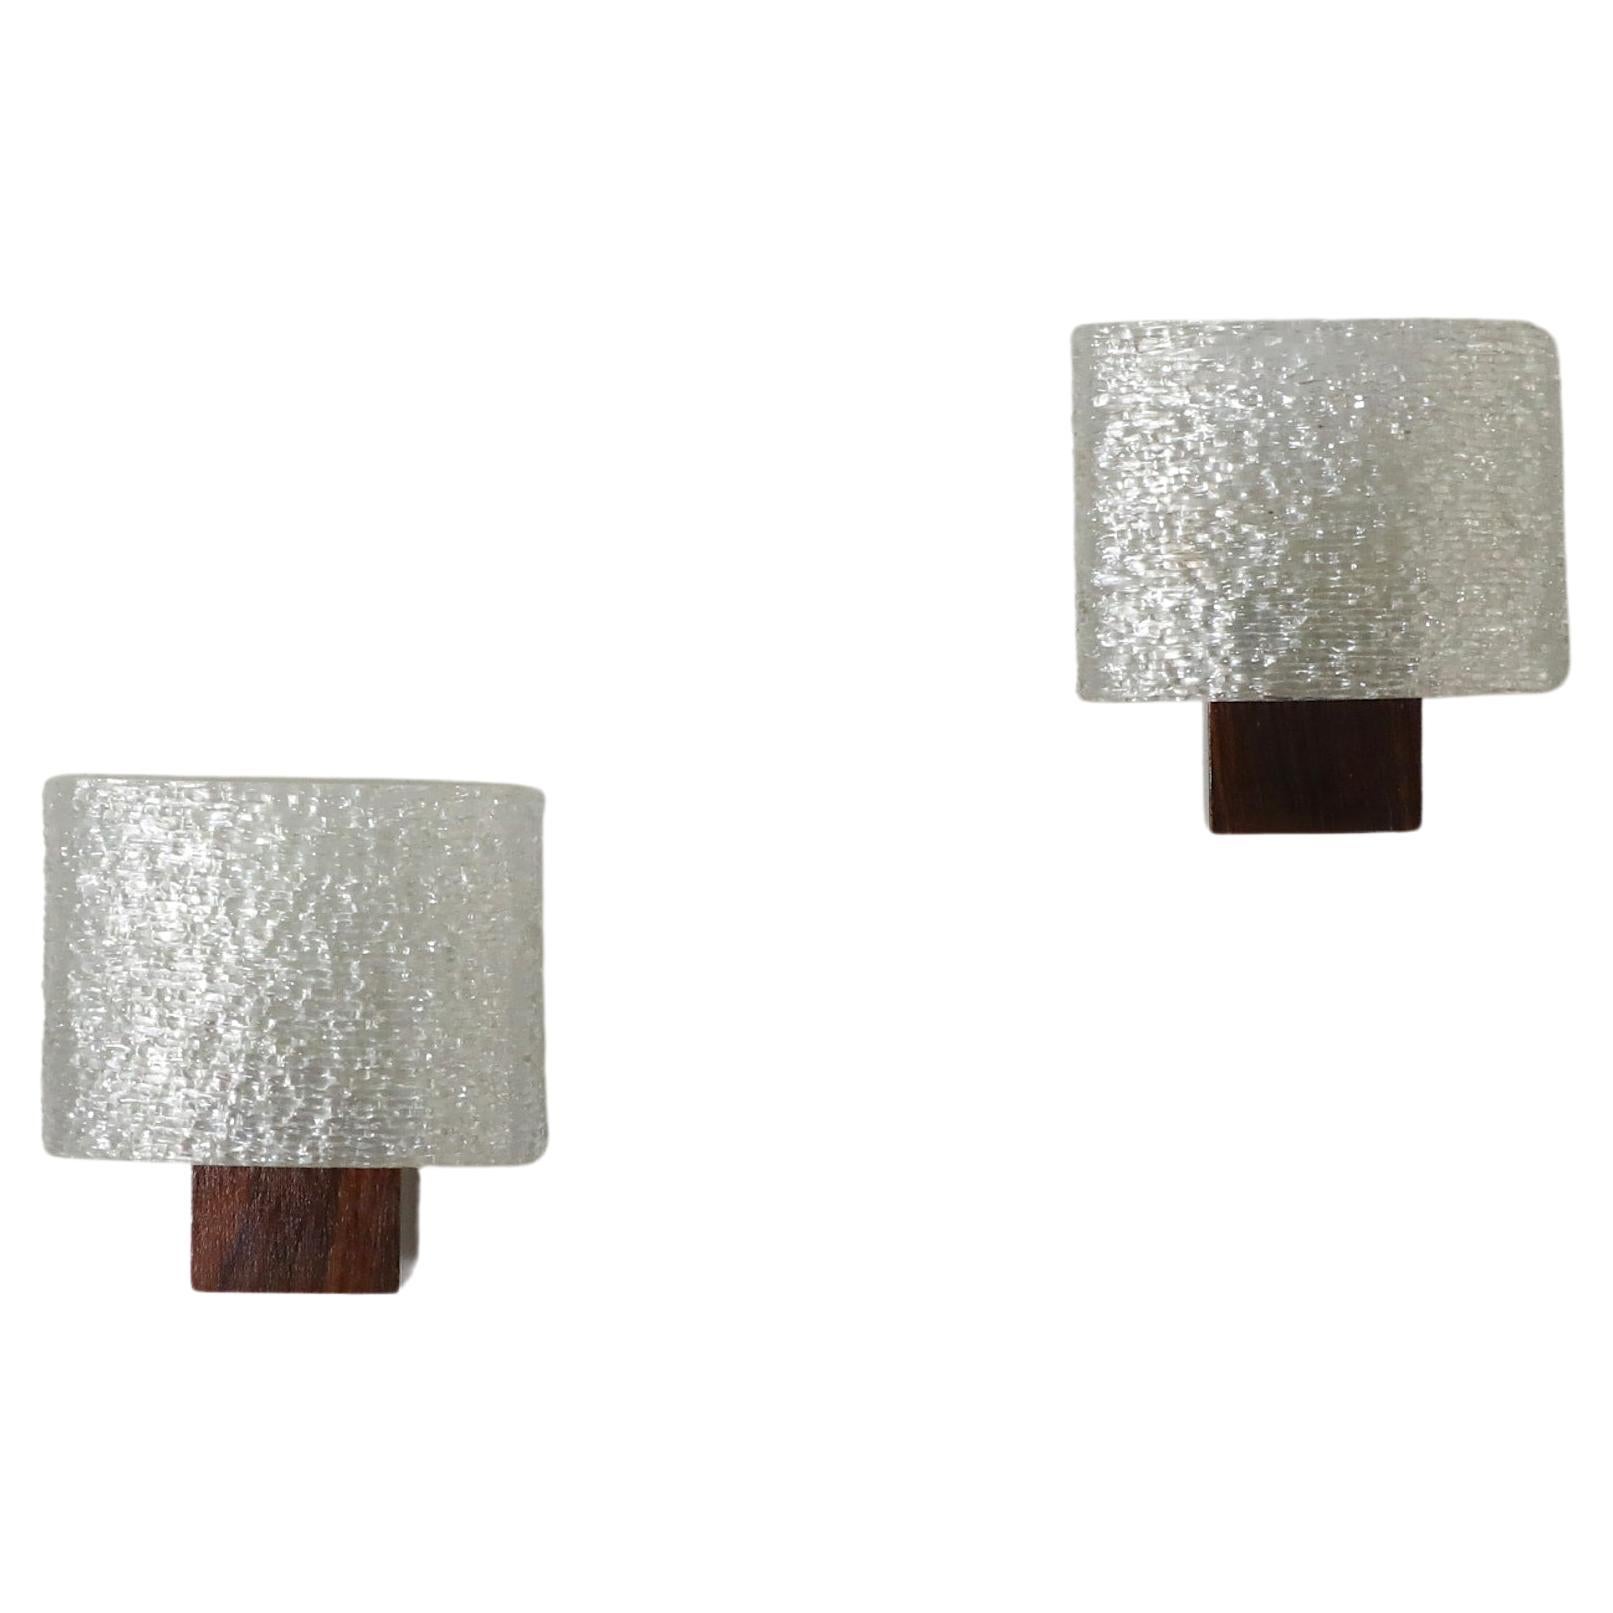 Pair of Mid-Century Rosewood & Chrome Base Sconces with Textured Resin Shades